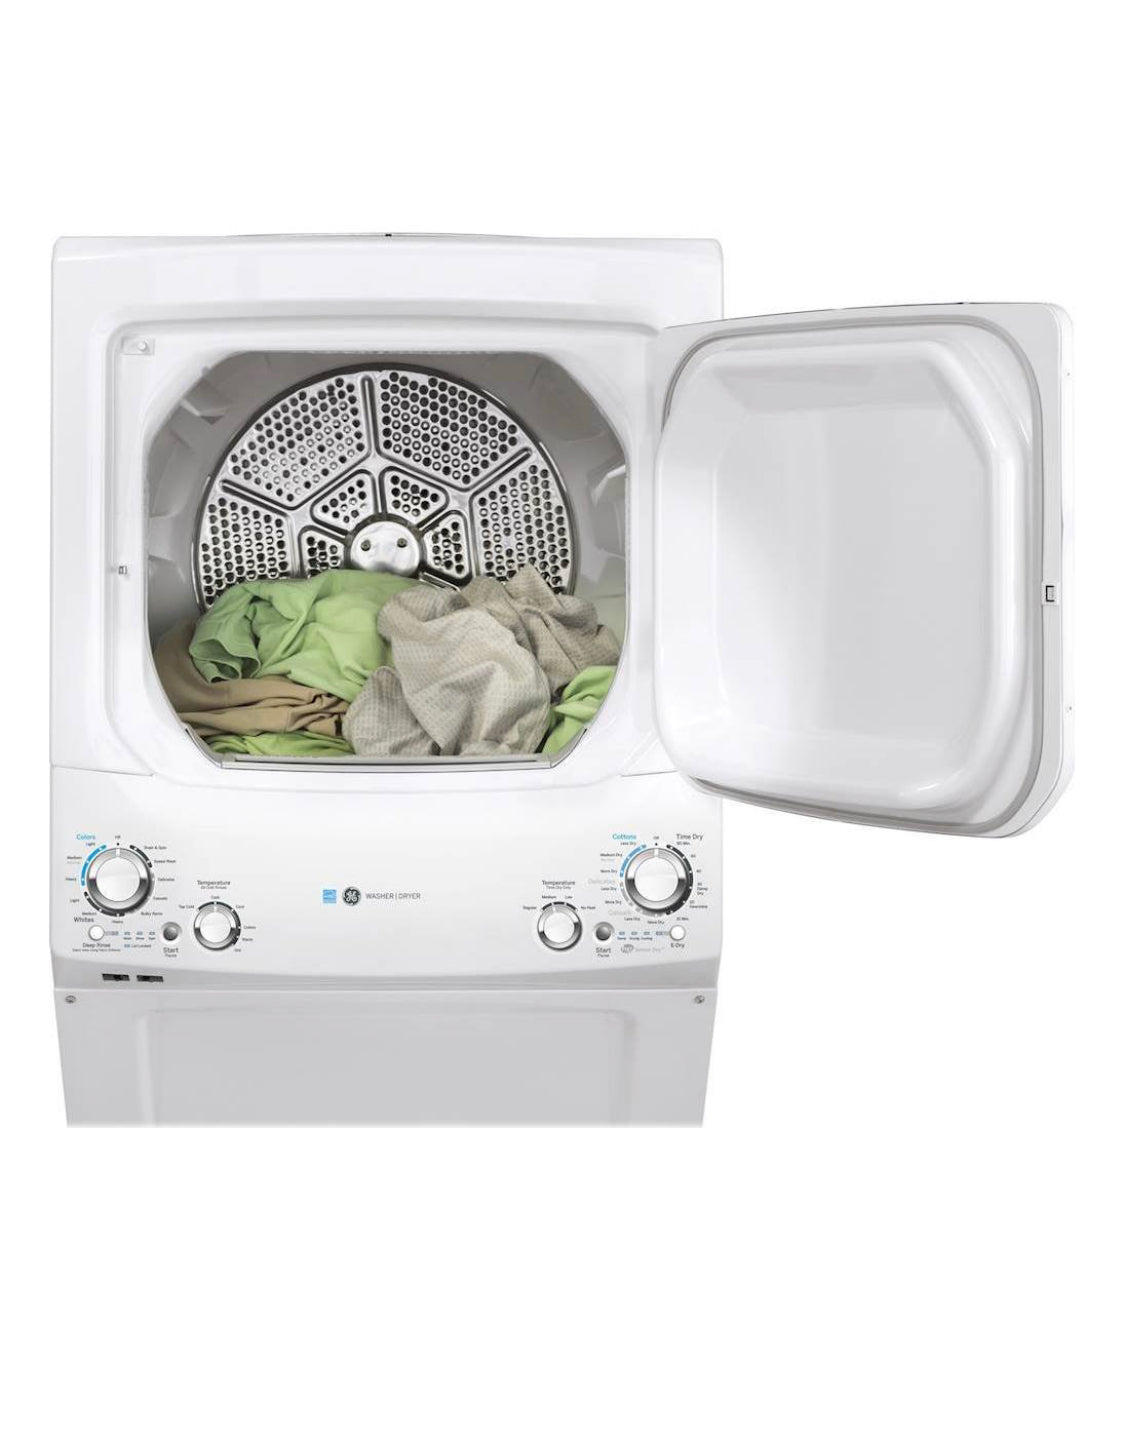 GE - 3.9 Cu. Ft. Top Load Washer and 5.5 Cu. Ft. Electric Dryer Laundry Center - White